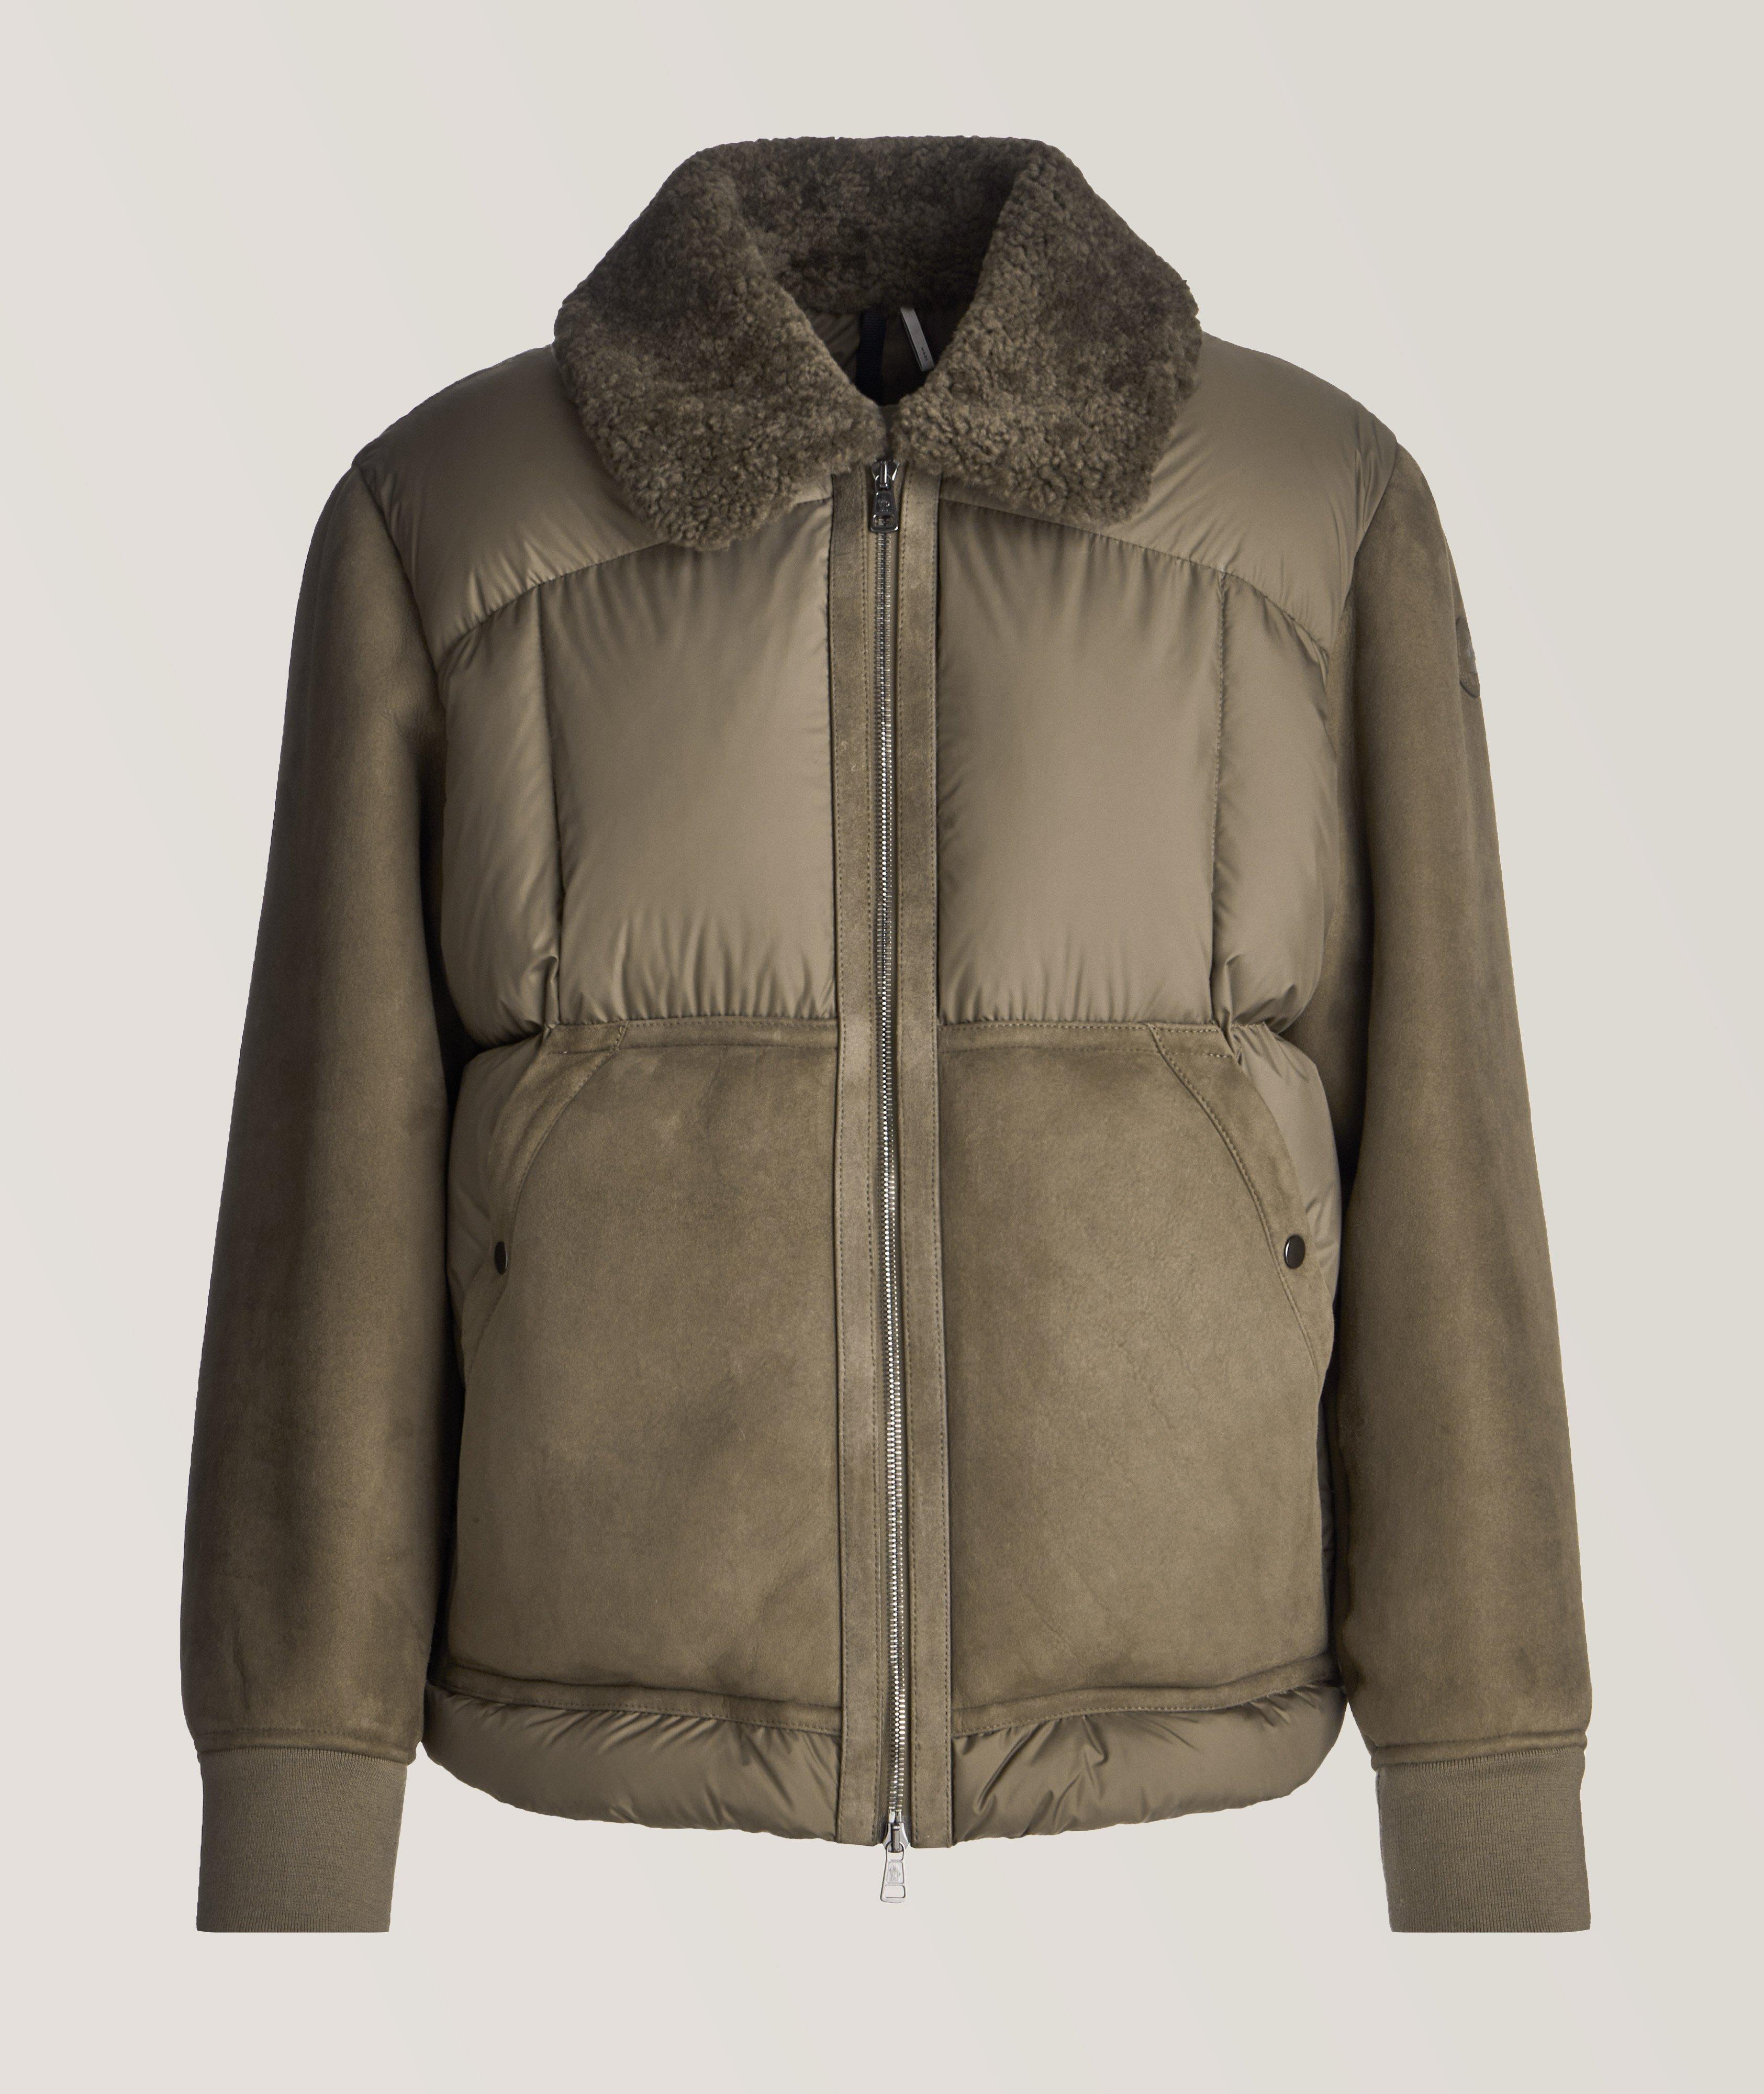 Gers Mixed Material Down Jacket image 0